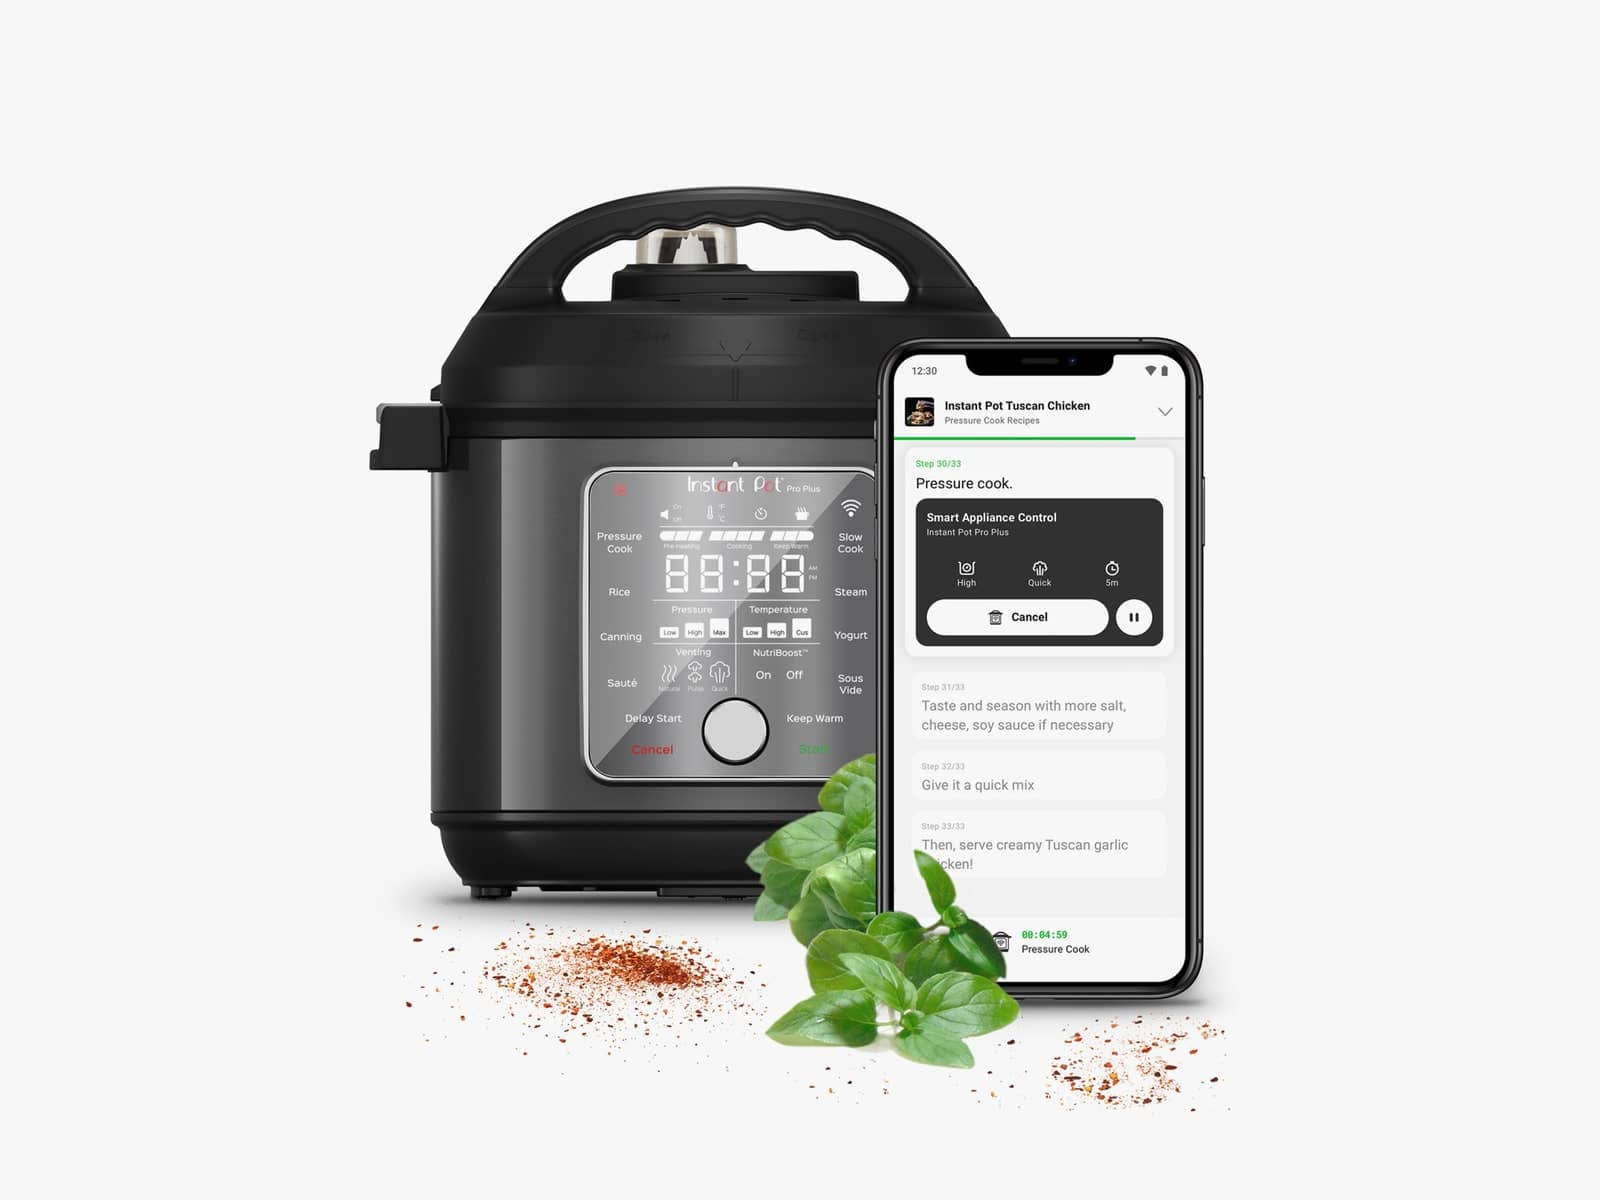 Instant Pot Pro Plus with smartphone displaying the Instant Pot app